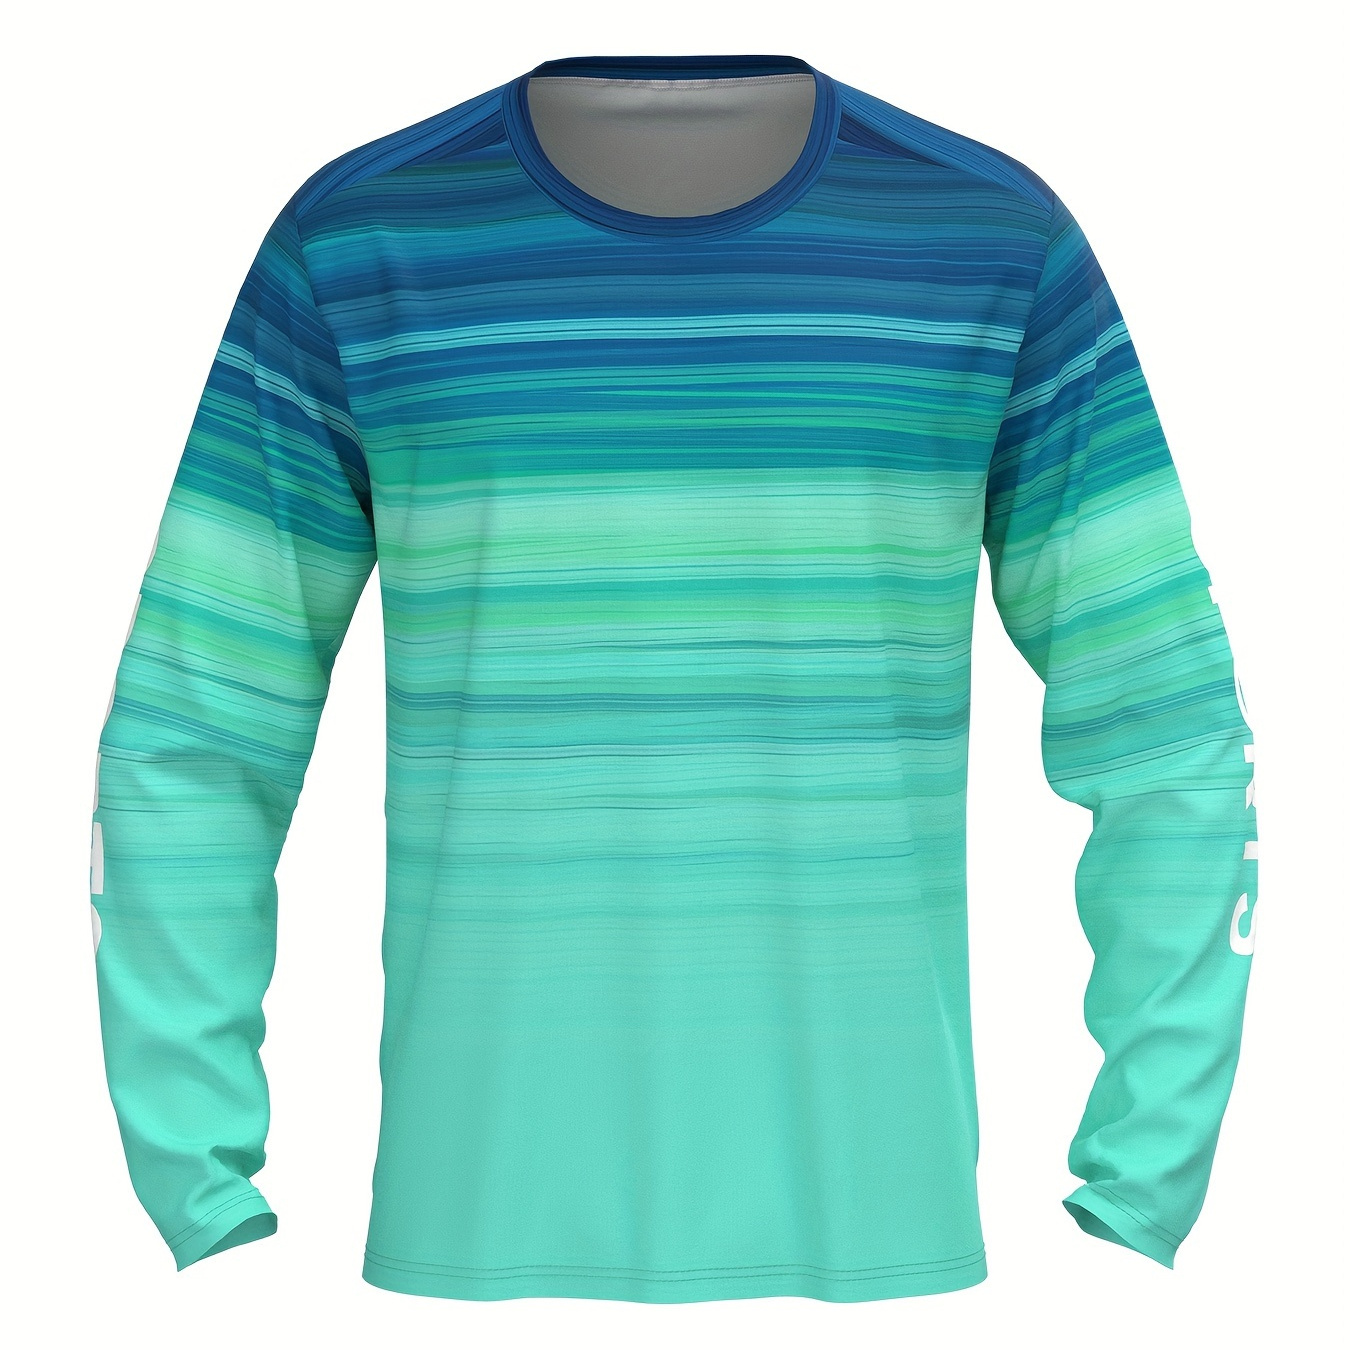 

Men's Stripe Graphic Print Sun Protection Shirt, Quick Dry Long Sleeve Crew Neck Rash Guard For Fishing Hiking Outdoor